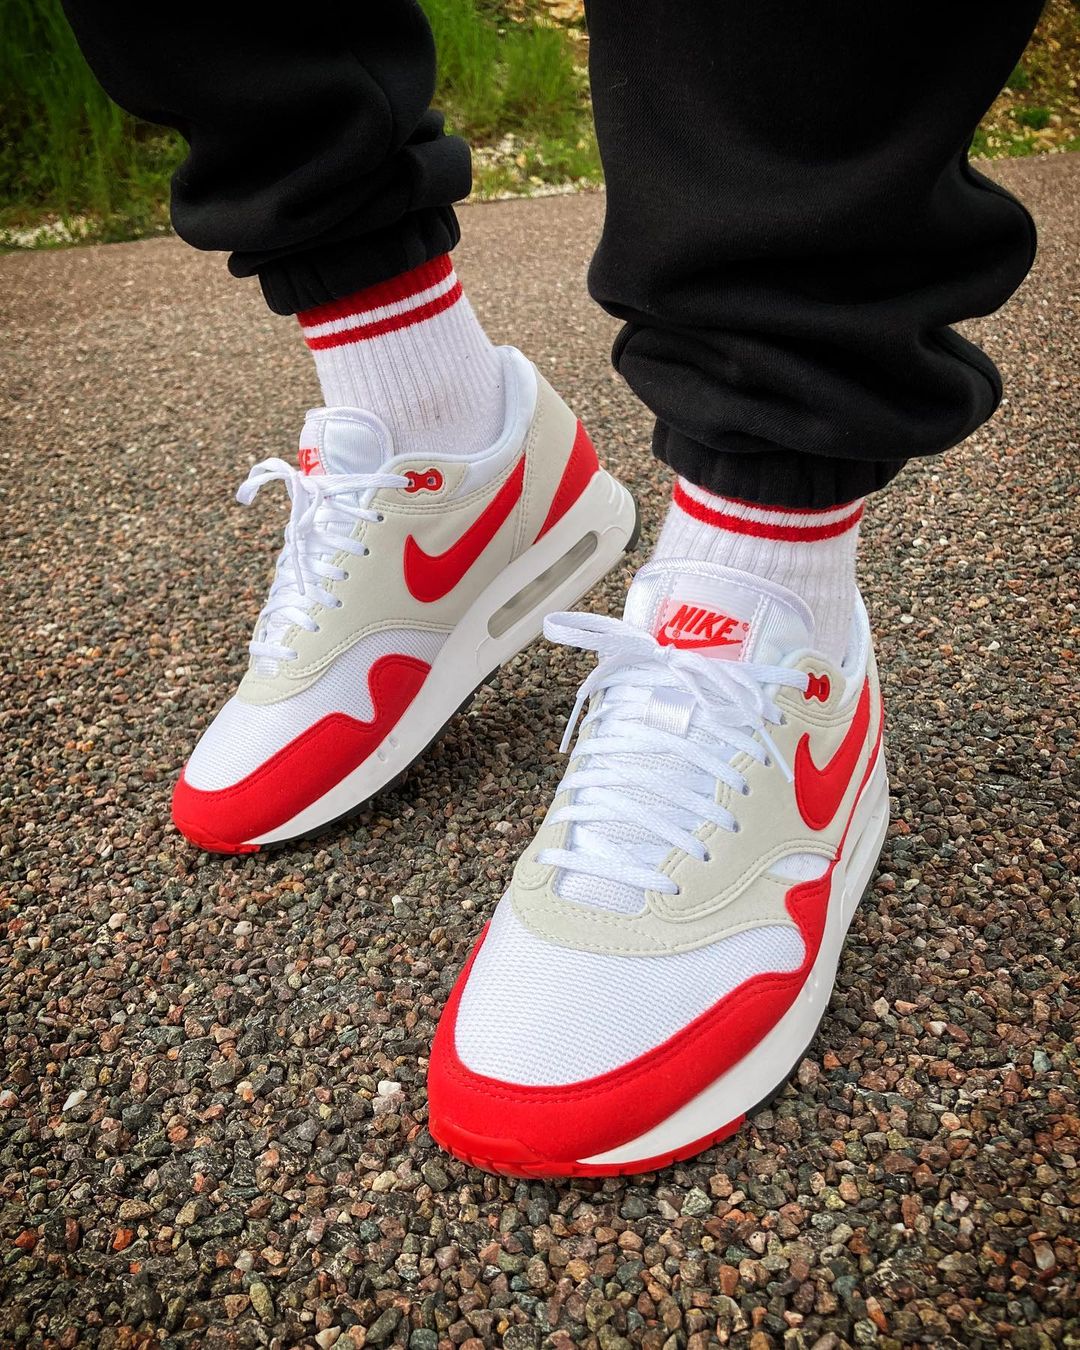 Nike Air Max 1 OG Red Big Bubble @norbbie_williams